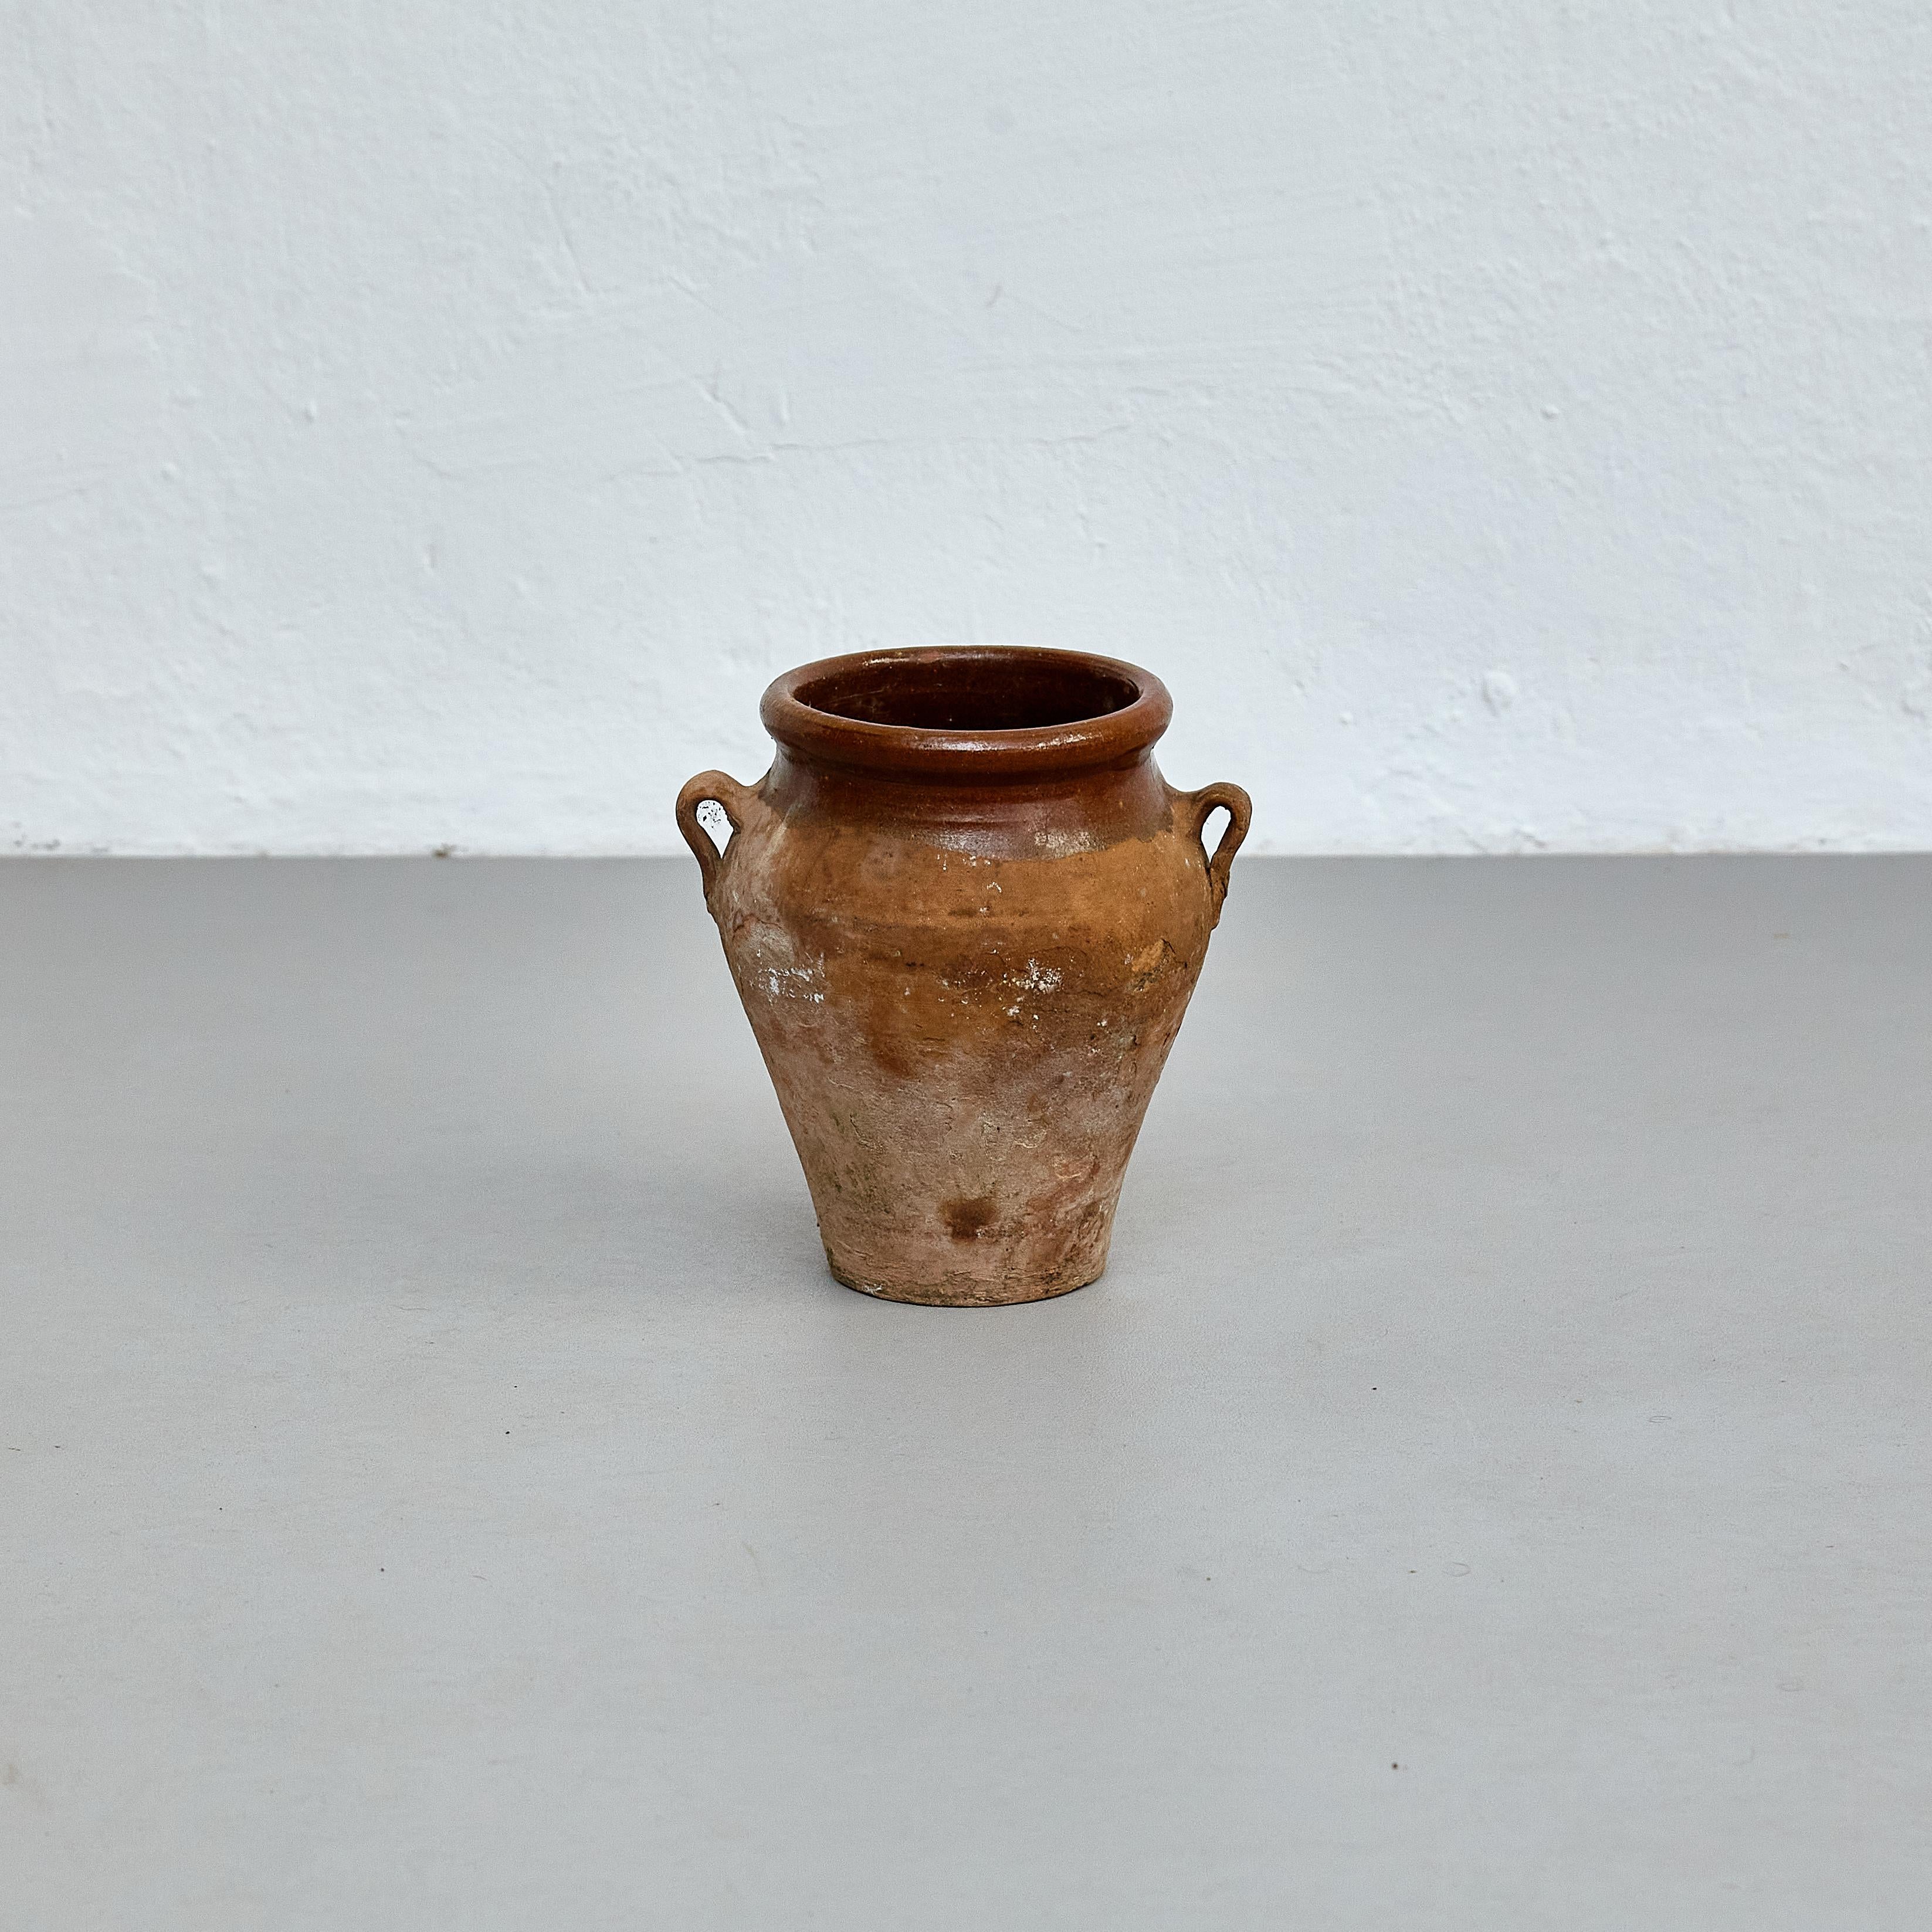 Early 20th century traditional Spanish ceramic vase.

Manufactured in Spain, early 20th century.

In original condition with minor wear consistent of age and use, preserving a beautiful patina.

Materials: 
Ceramic

Dimensions: 
Diam 19.5